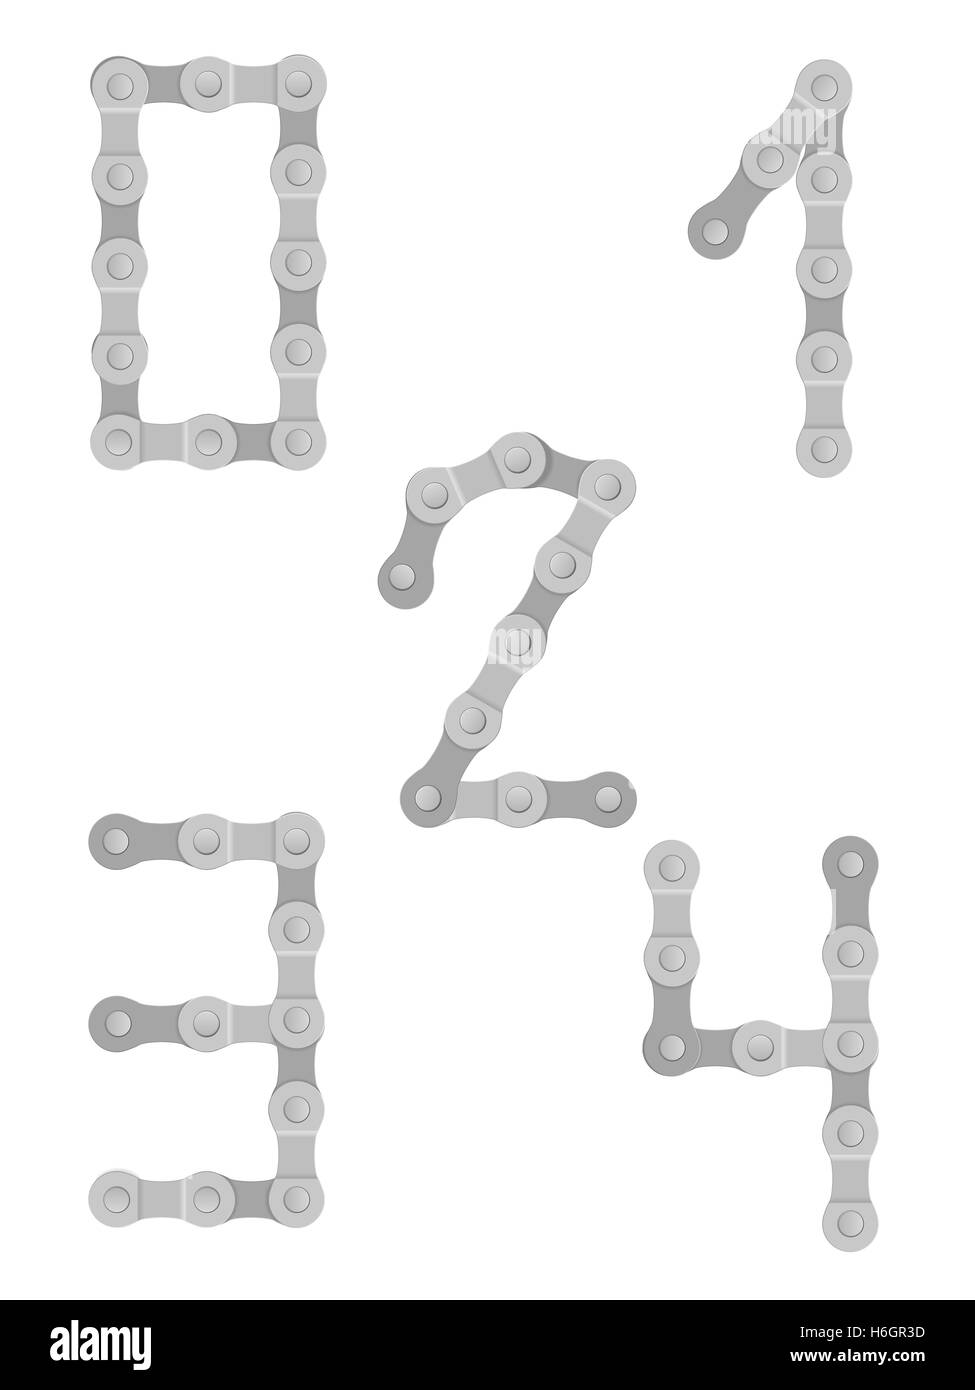 Cycling chain number 0 to 4 on a white background. Stock Photo